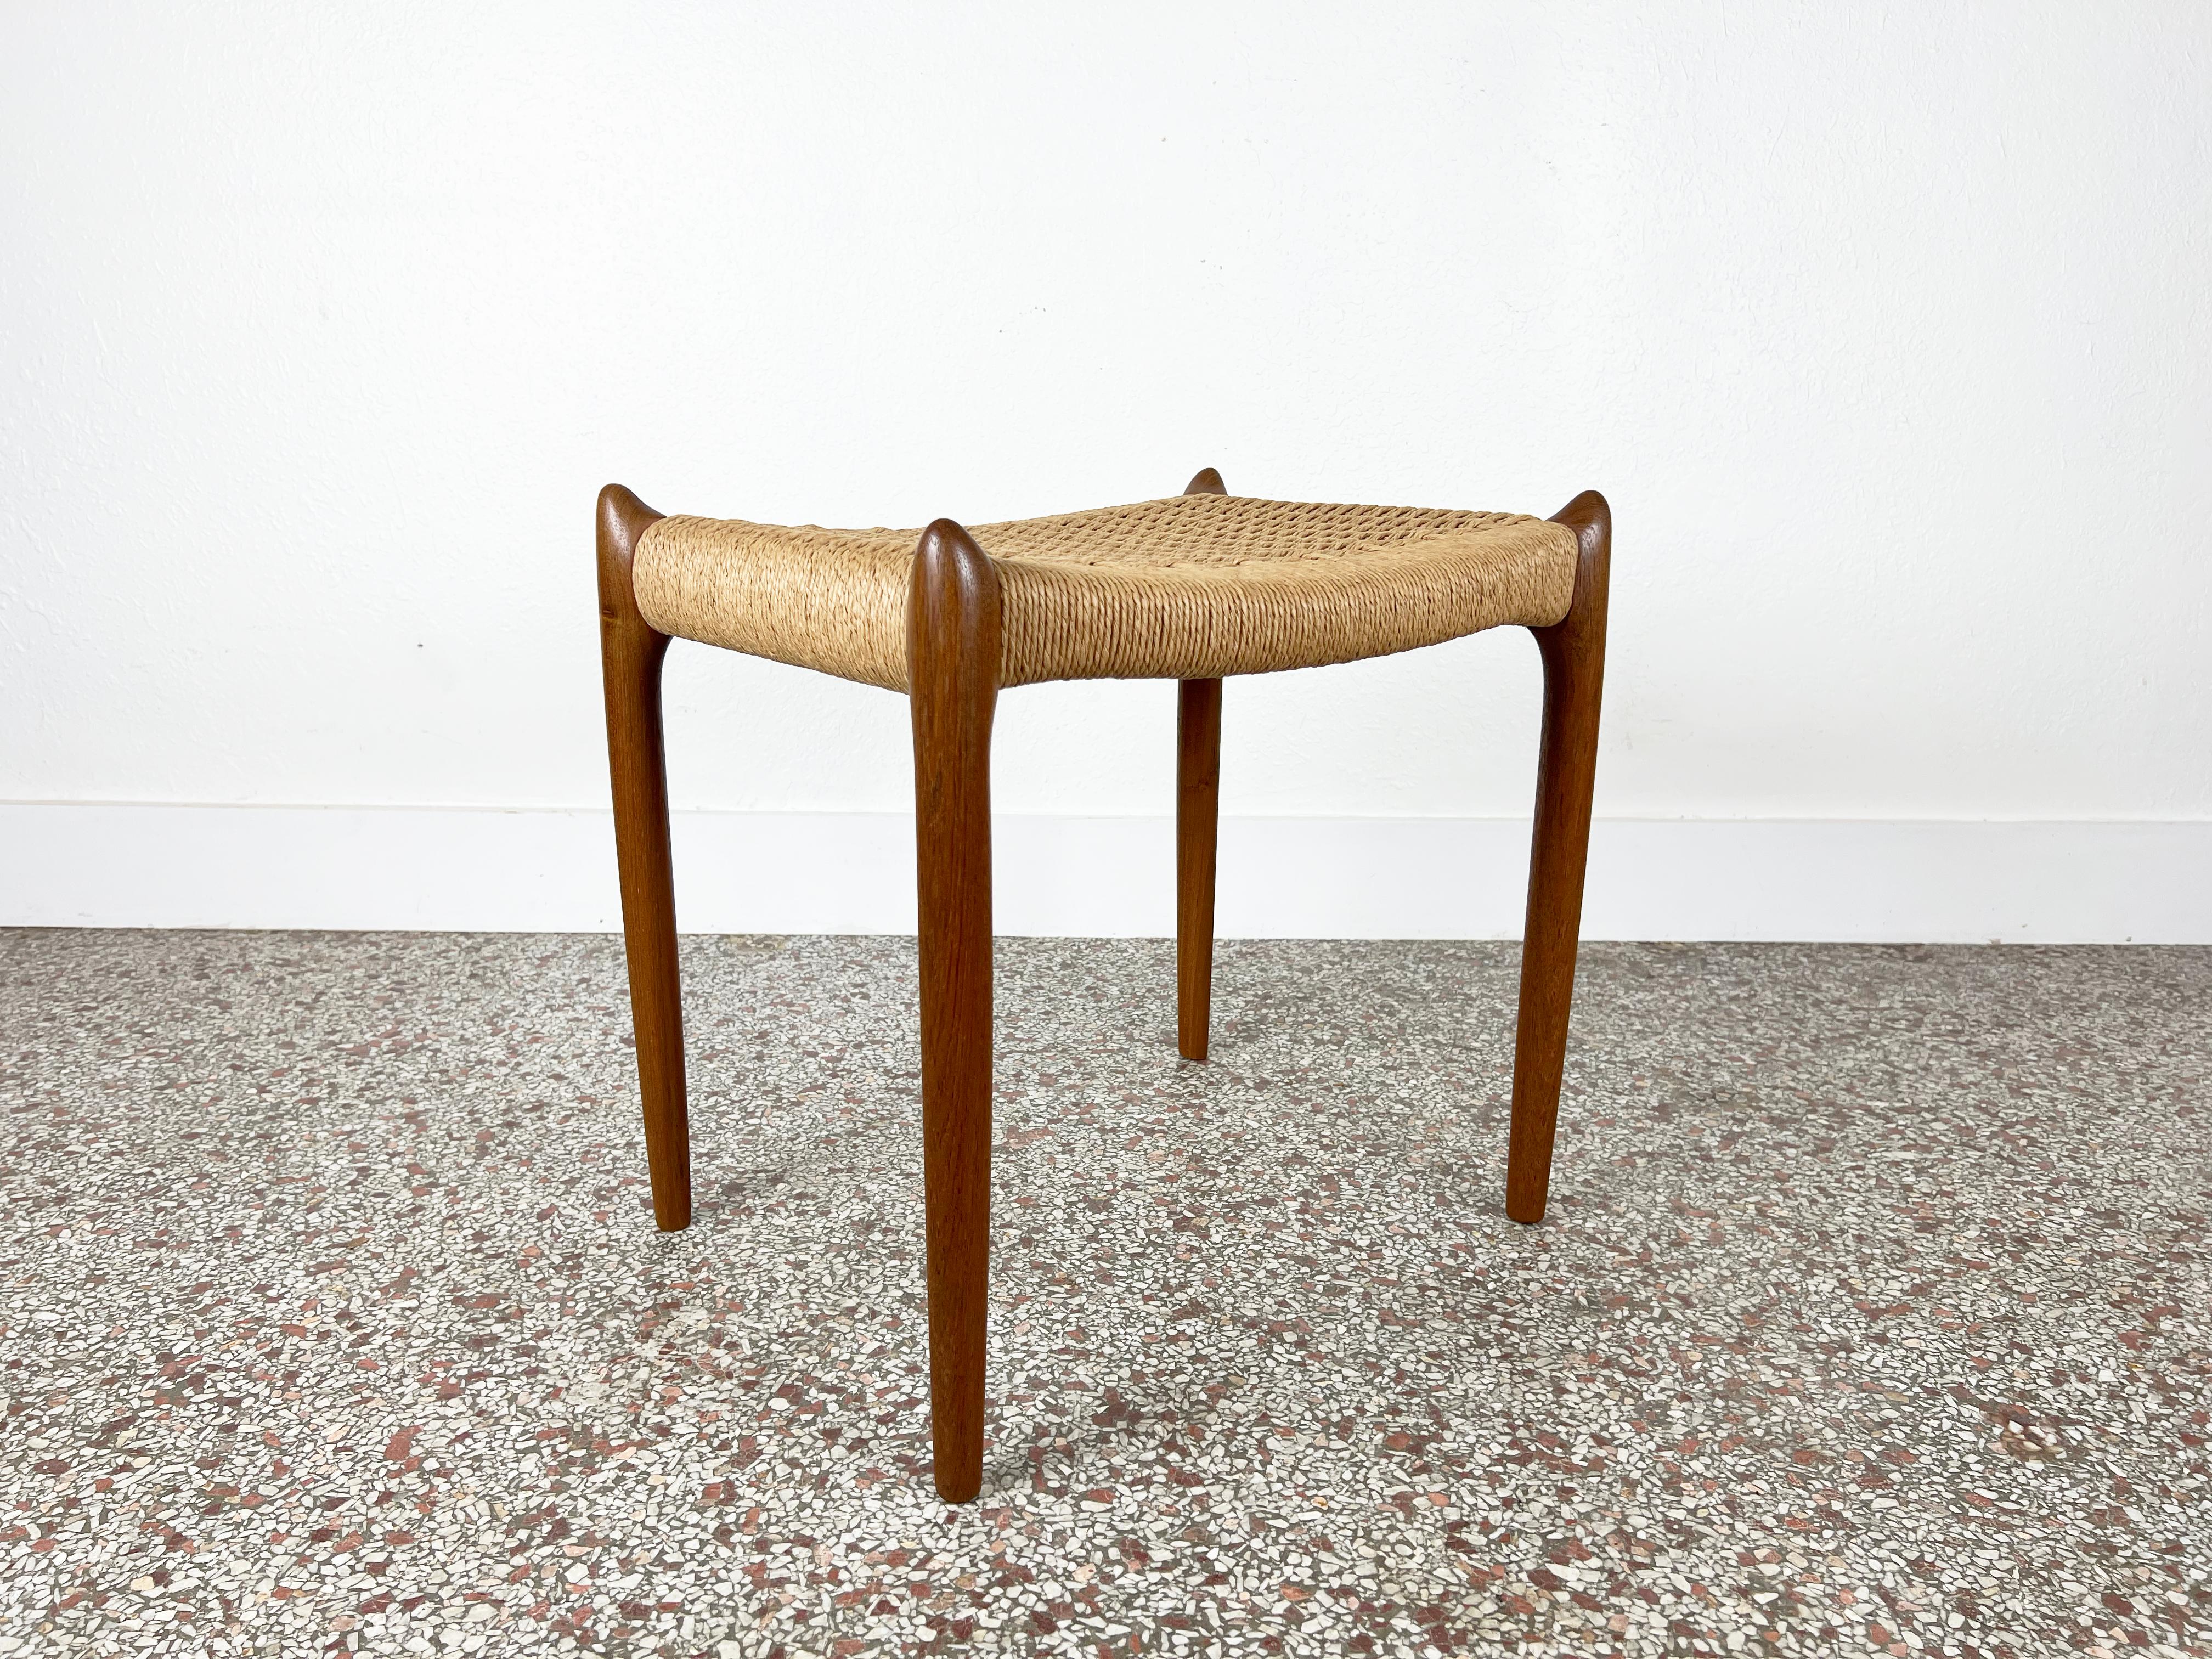 Vintage model 78A stool in oiled teak with a woven paper cord seat by Niels Otto Møller for J.L. Møllers Møbelfabrik.

Designer: Niels Otto Møller

Manufacturer: J.L. Møllers Møbelfabrik

Origin: Denmark

Year : 1960s

Style: Mid-Century